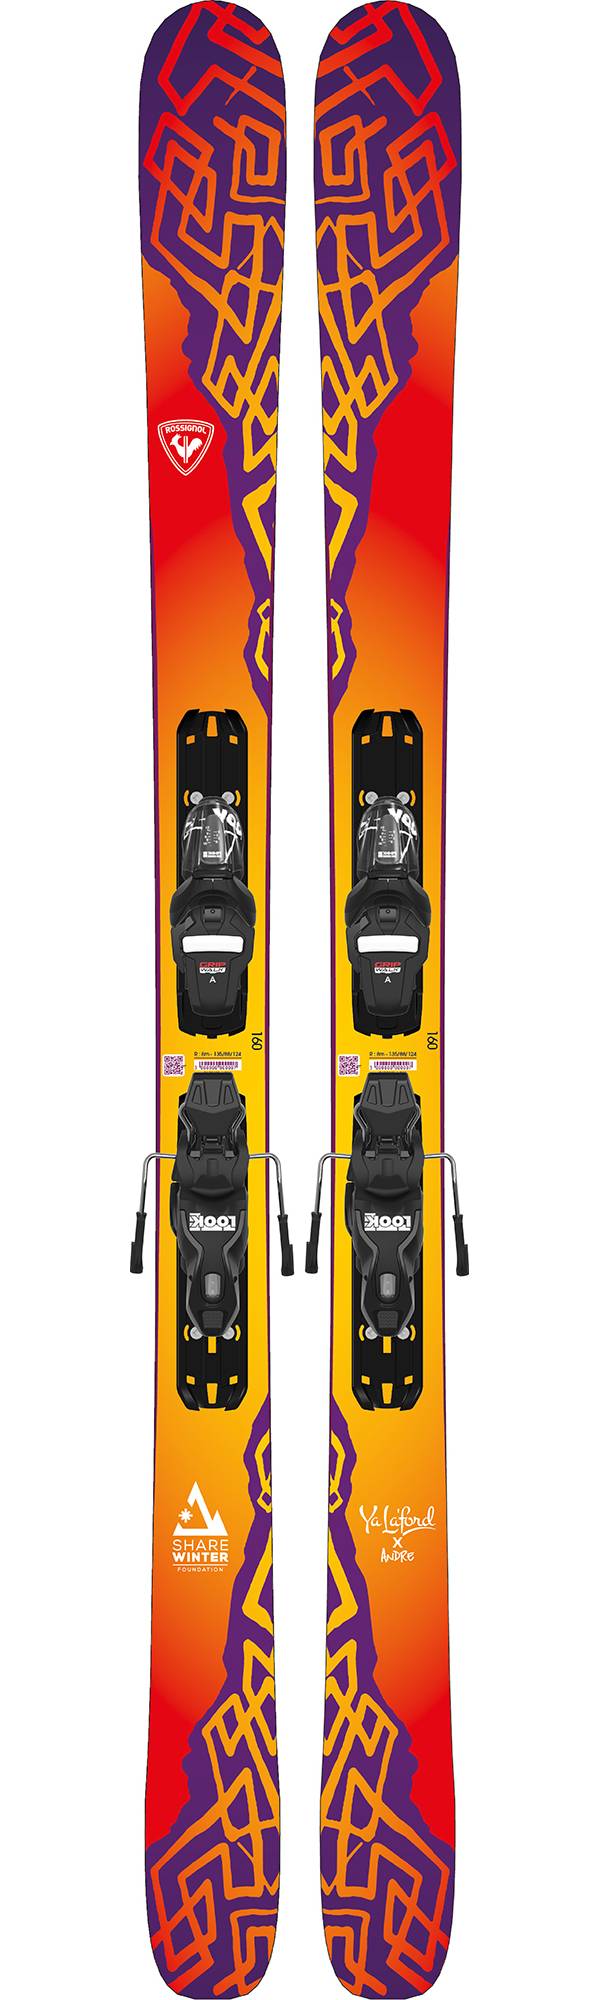 Rossignol Men's Freeride Sender 90 Pro Express with X-Press 10 GW B93 Binding Ski Package Share Winter Edition product image